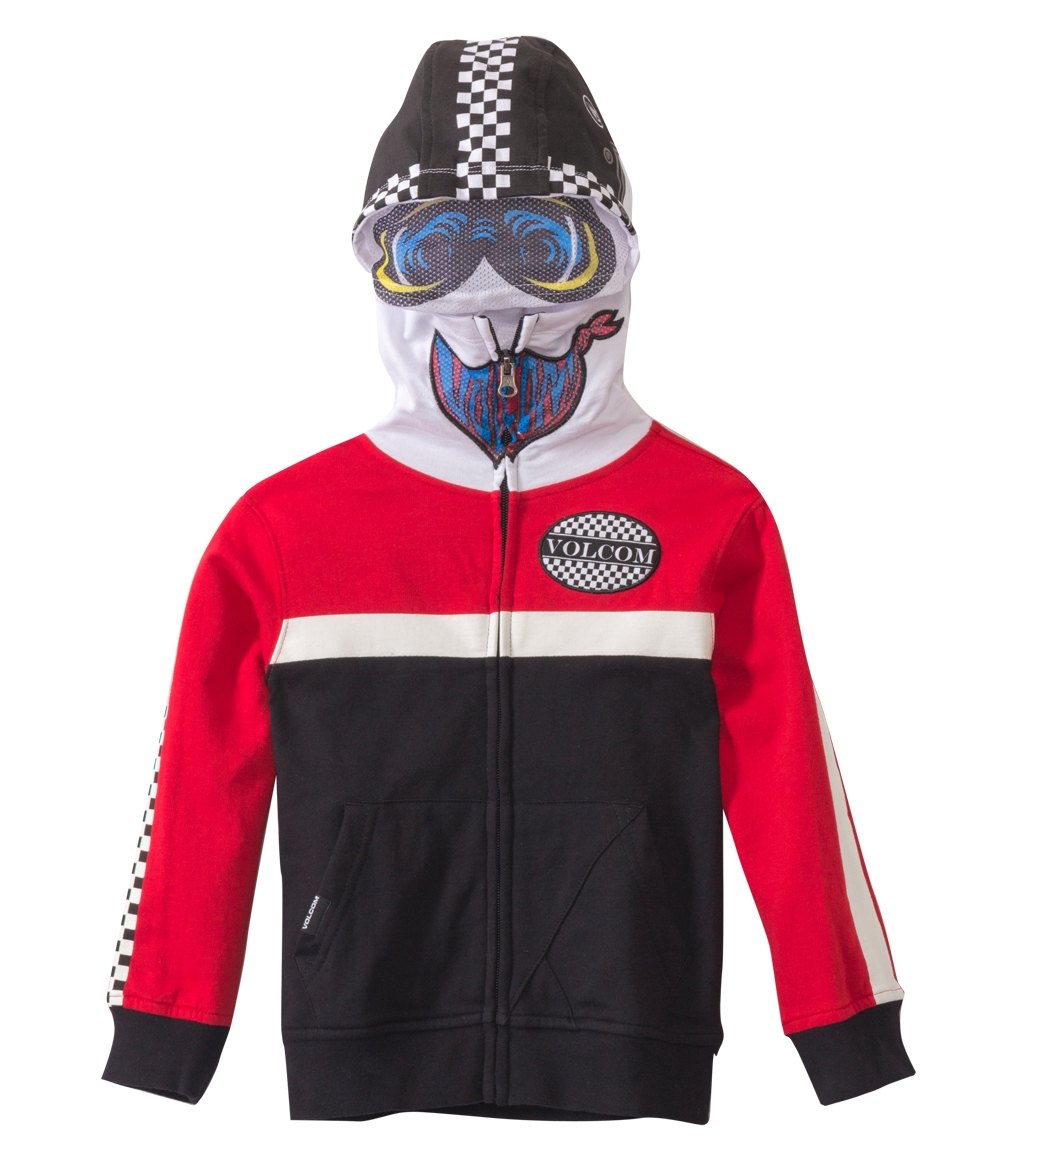 Volcom Boys' In The Race Long Sleeve Shirt Full Zip Hoodie 2T-4T - Black 2T Cotton/Polyester - Swimoutlet.com